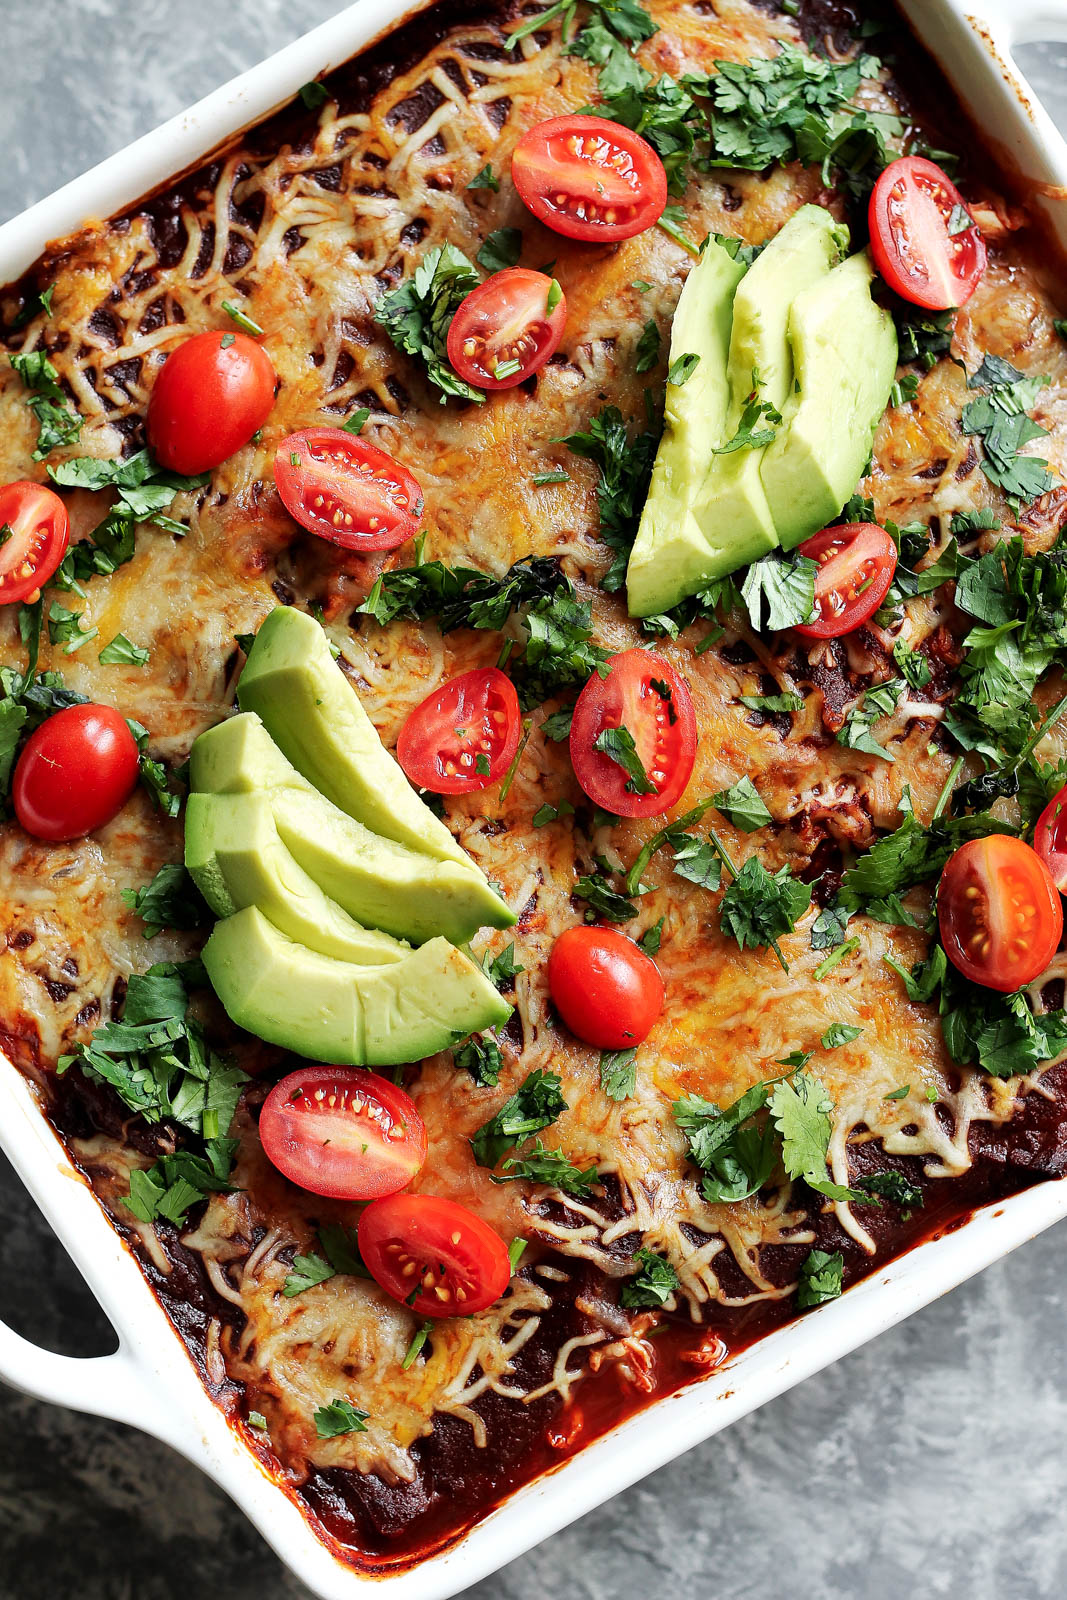 Low Carb Chicken Zucchini Enchilada Bake from ambitiouskitchen.com on foodiecrush.com